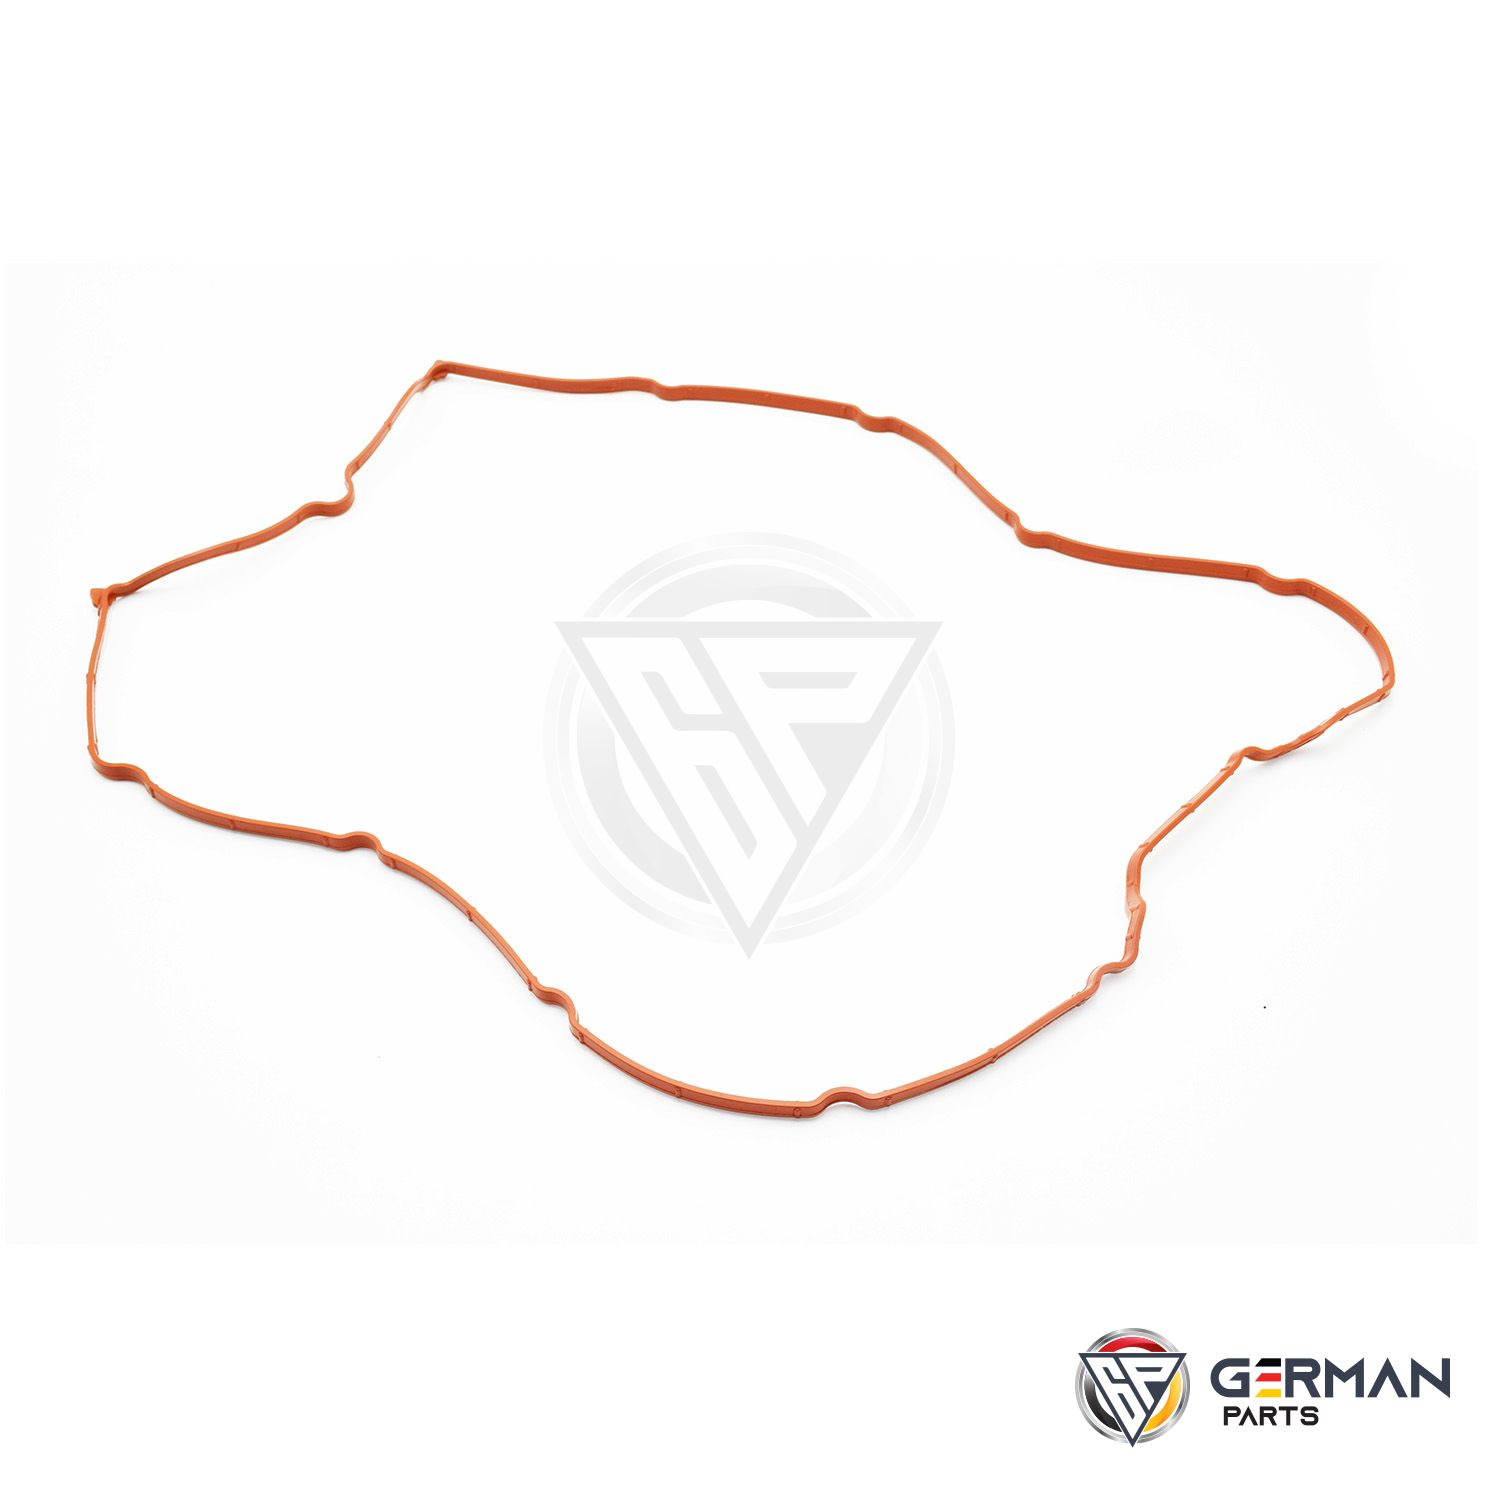 Buy Mercedes Benz Valve Cover Gasket Right 1590160221 - German Parts